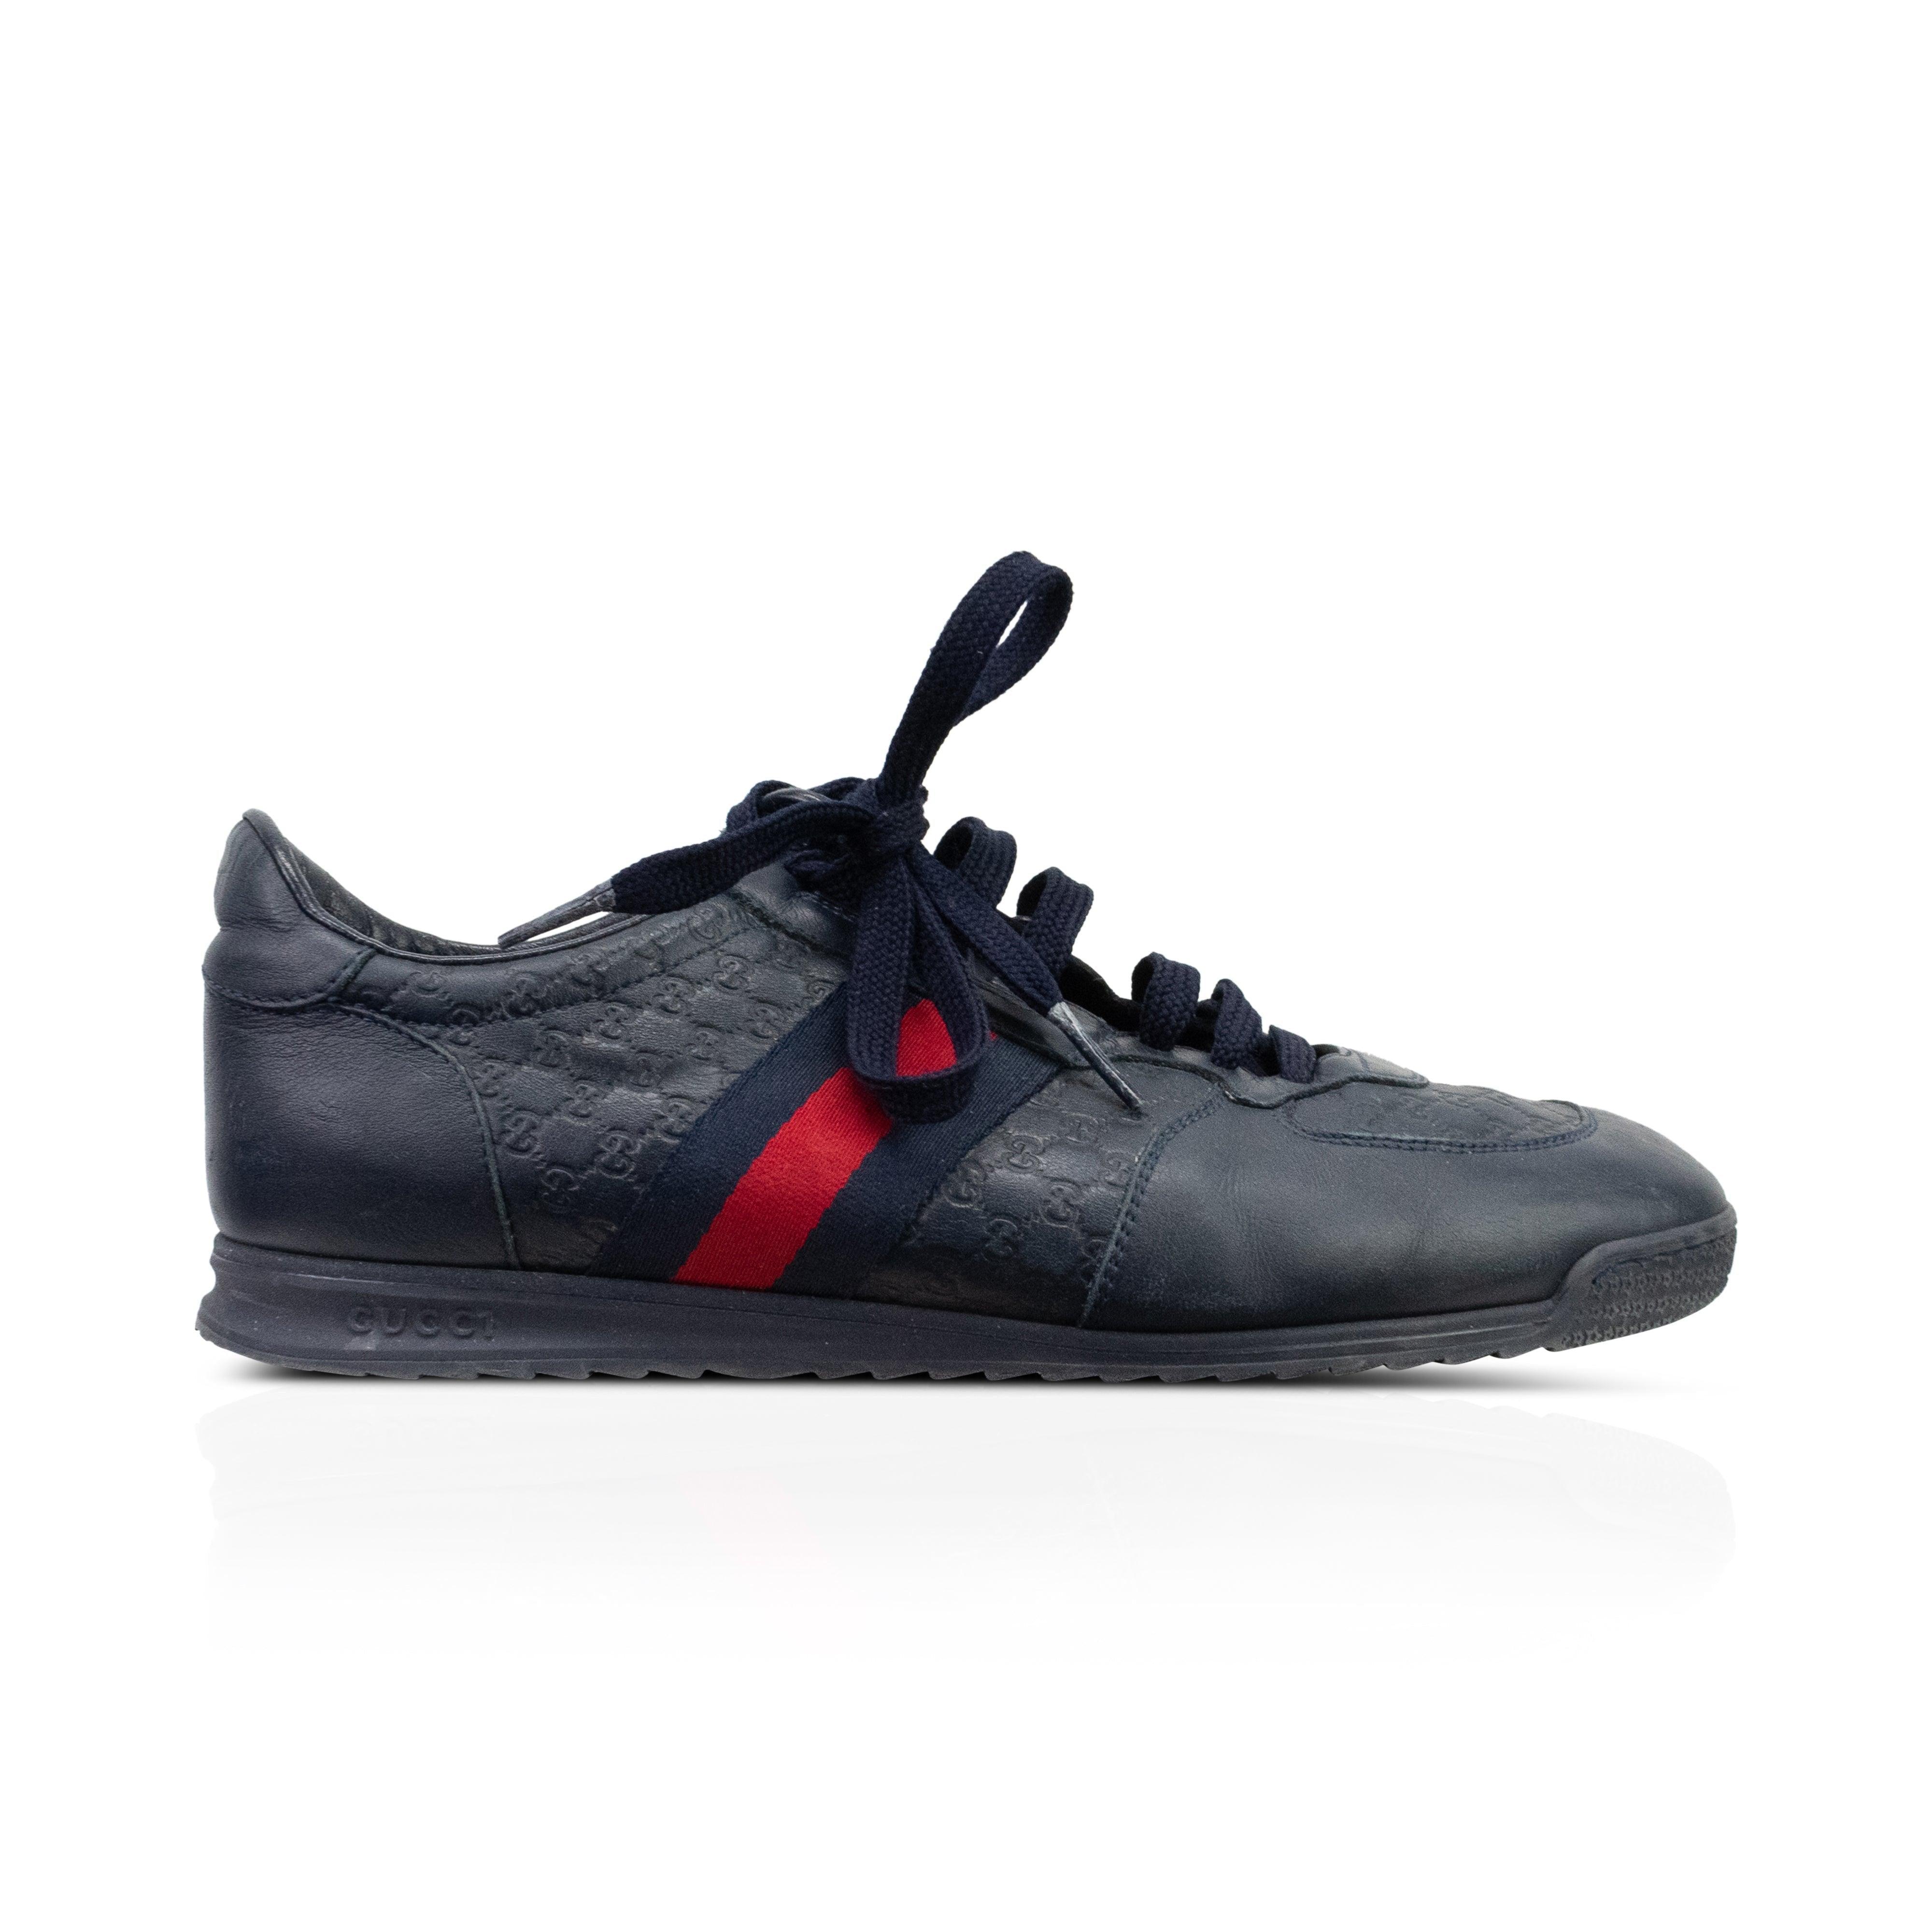 Gucci Sneakers - Men's 7 - Fashionably Yours